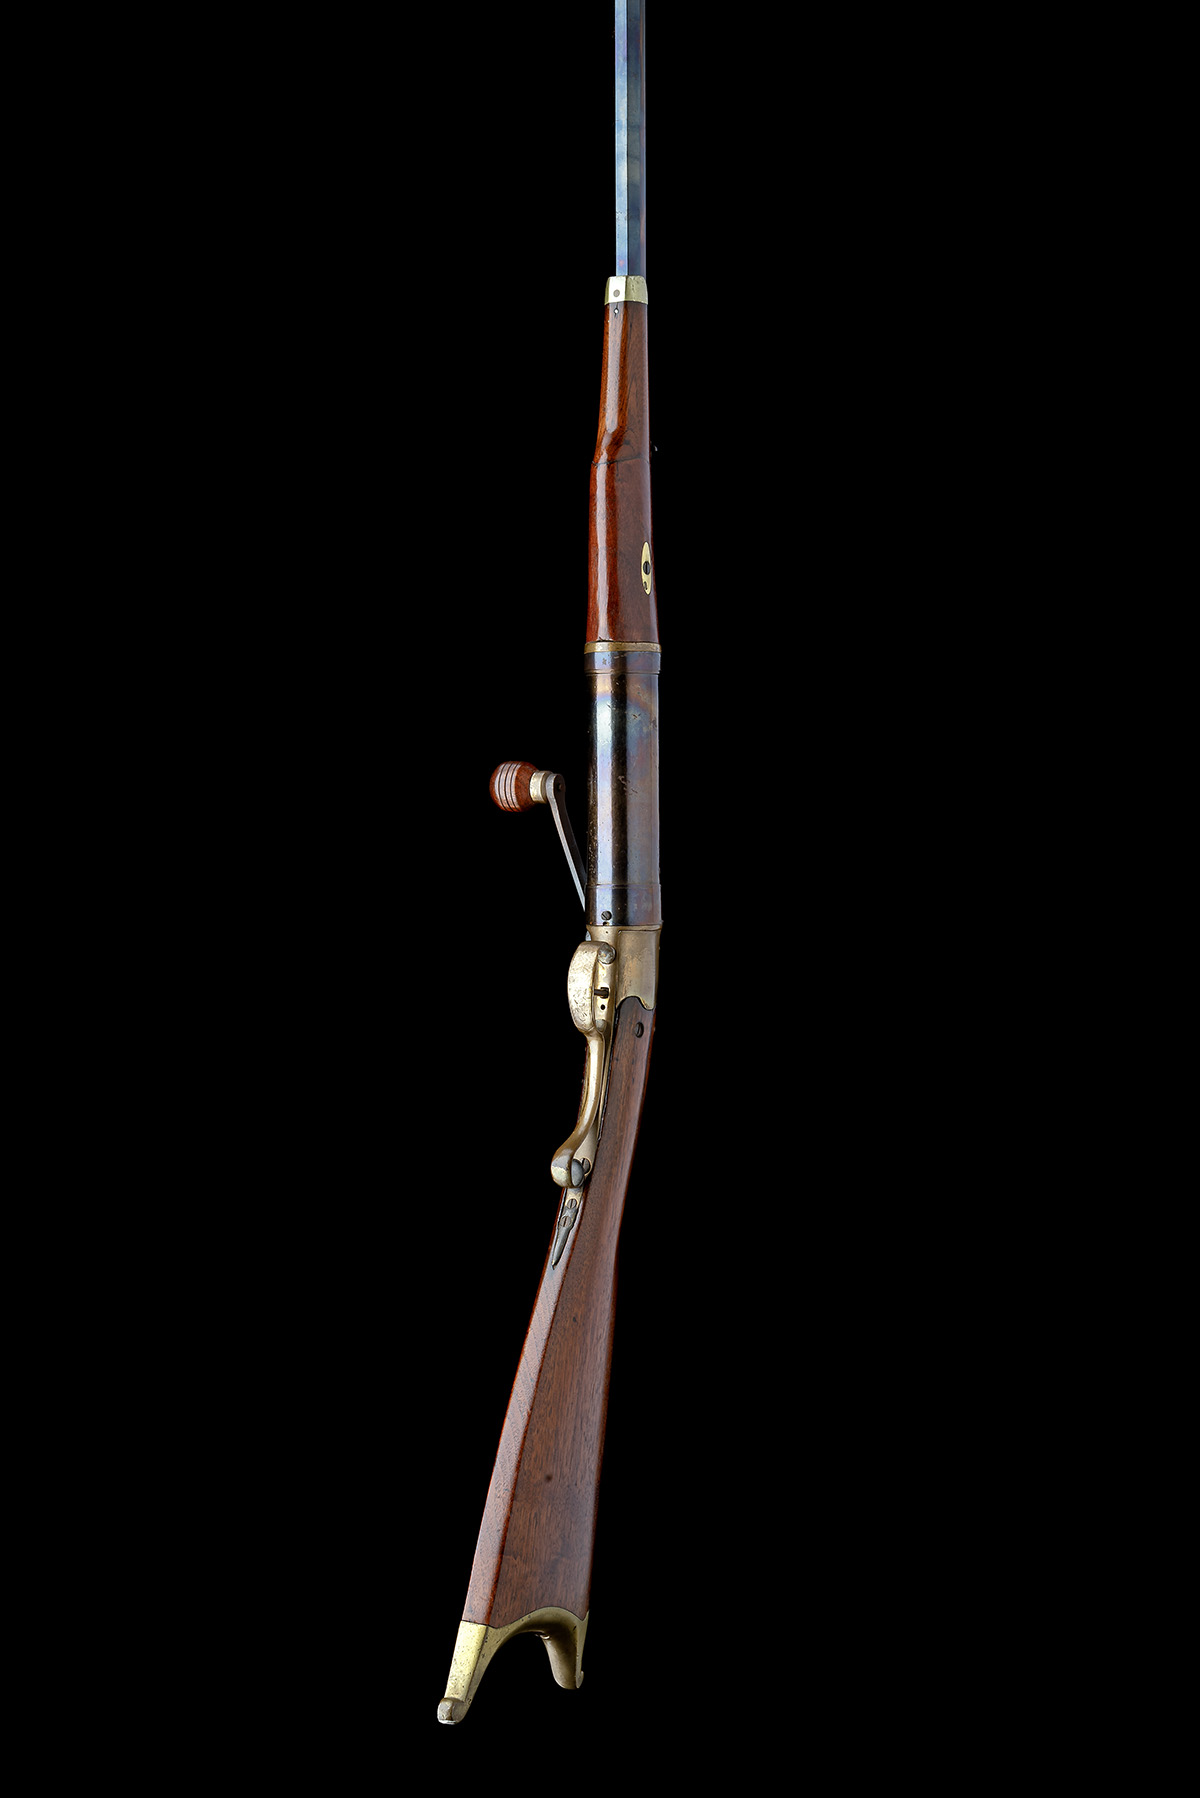 A RARE 8mm CRANK-WOUND AMERICAN 'PRIMARY NEW YORK TYPE' GALLERY AIR-RIFLE, POSSIBLY BY D. & J. - Image 6 of 8